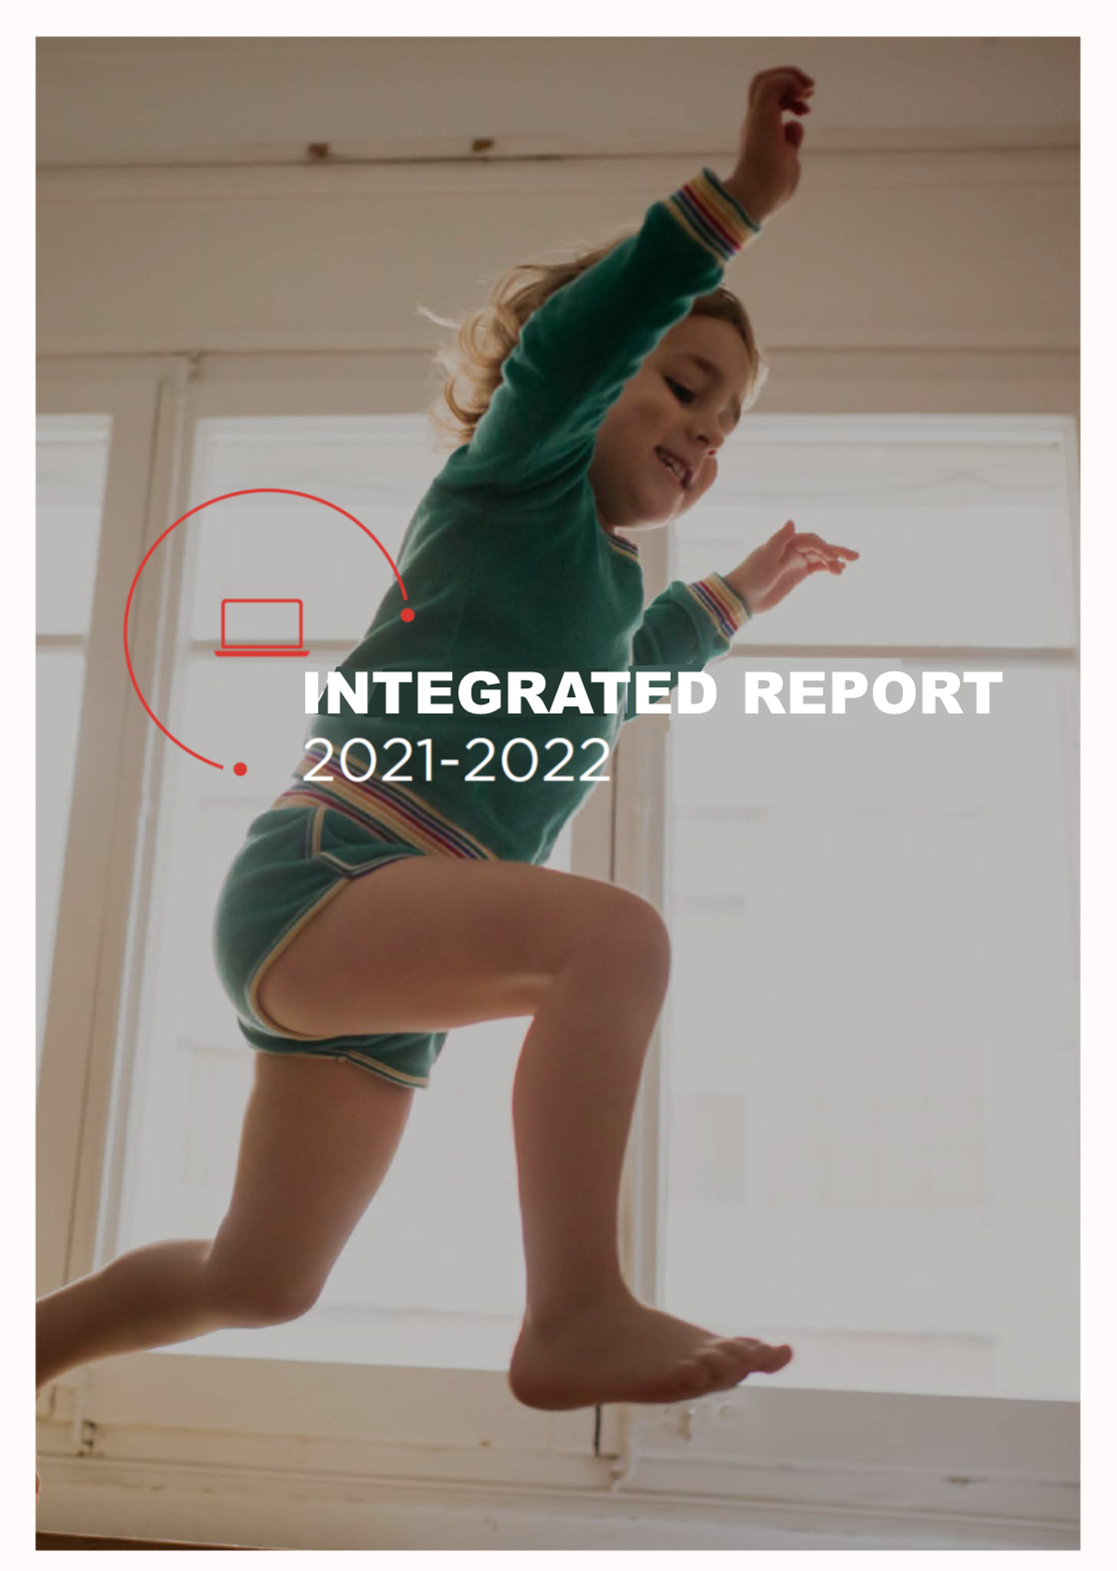 2021-2022 Integrated report